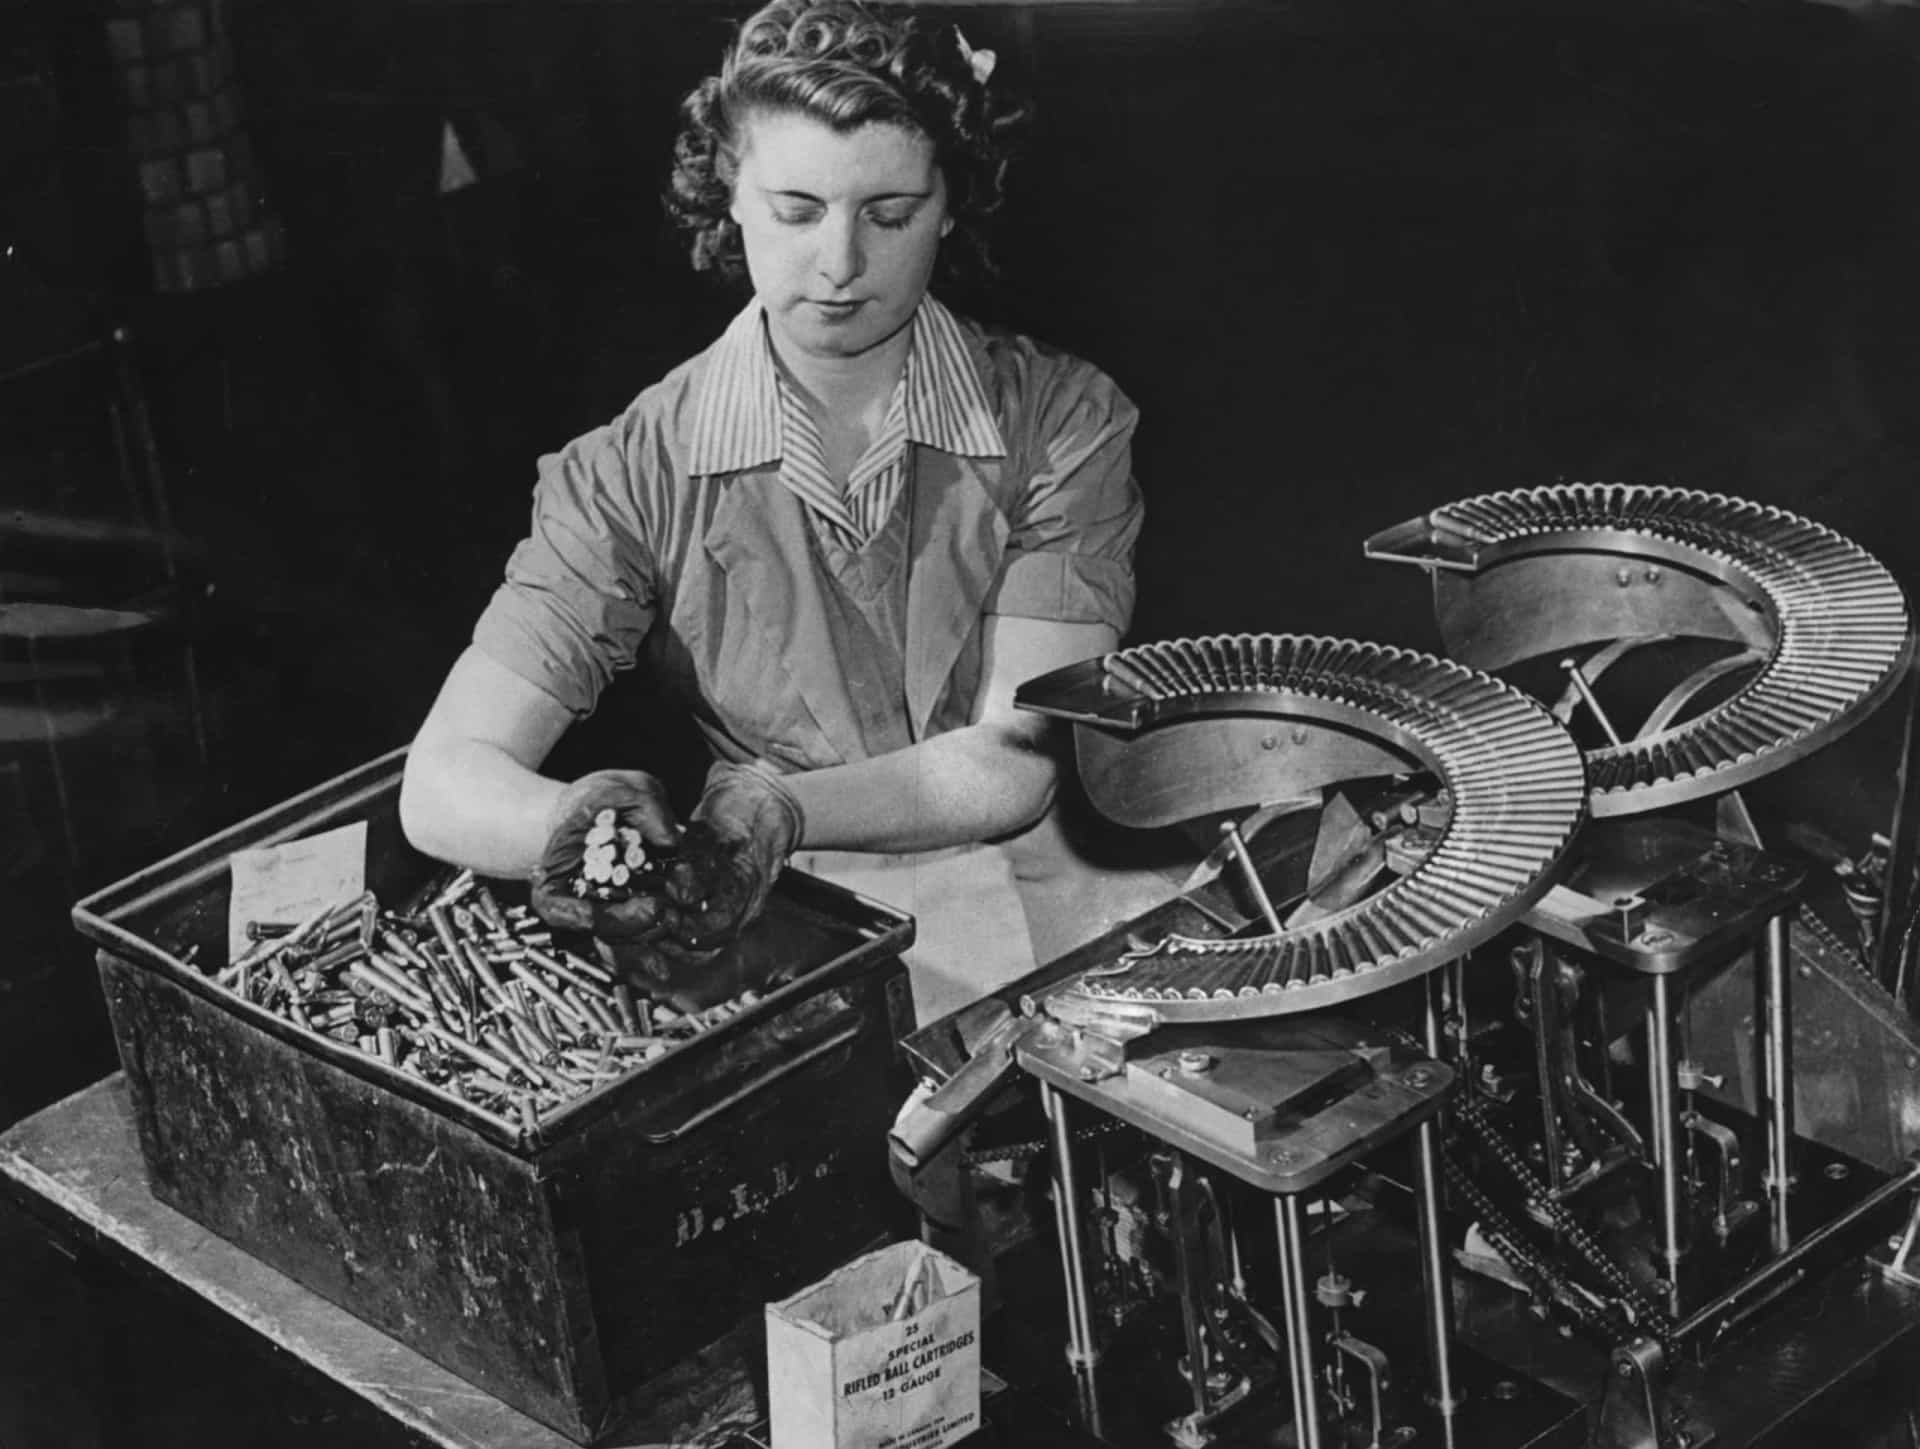 <p>During the war in factories all over Canada, thousands of women were employed in small arms ammunition production. Plant managers reported that in all operations where girls had replaced men, a high standard of workmanship had been maintained. This 1942 photograph shows a female worker loading a machine gun magazine.</p><p><a href="https://www.msn.com/en-us/community/channel/vid-7xx8mnucu55yw63we9va2gwr7uihbxwc68fxqp25x6tg4ftibpra?cvid=94631541bc0f4f89bfd59158d696ad7e">Follow us and access great exclusive content everyday</a></p>